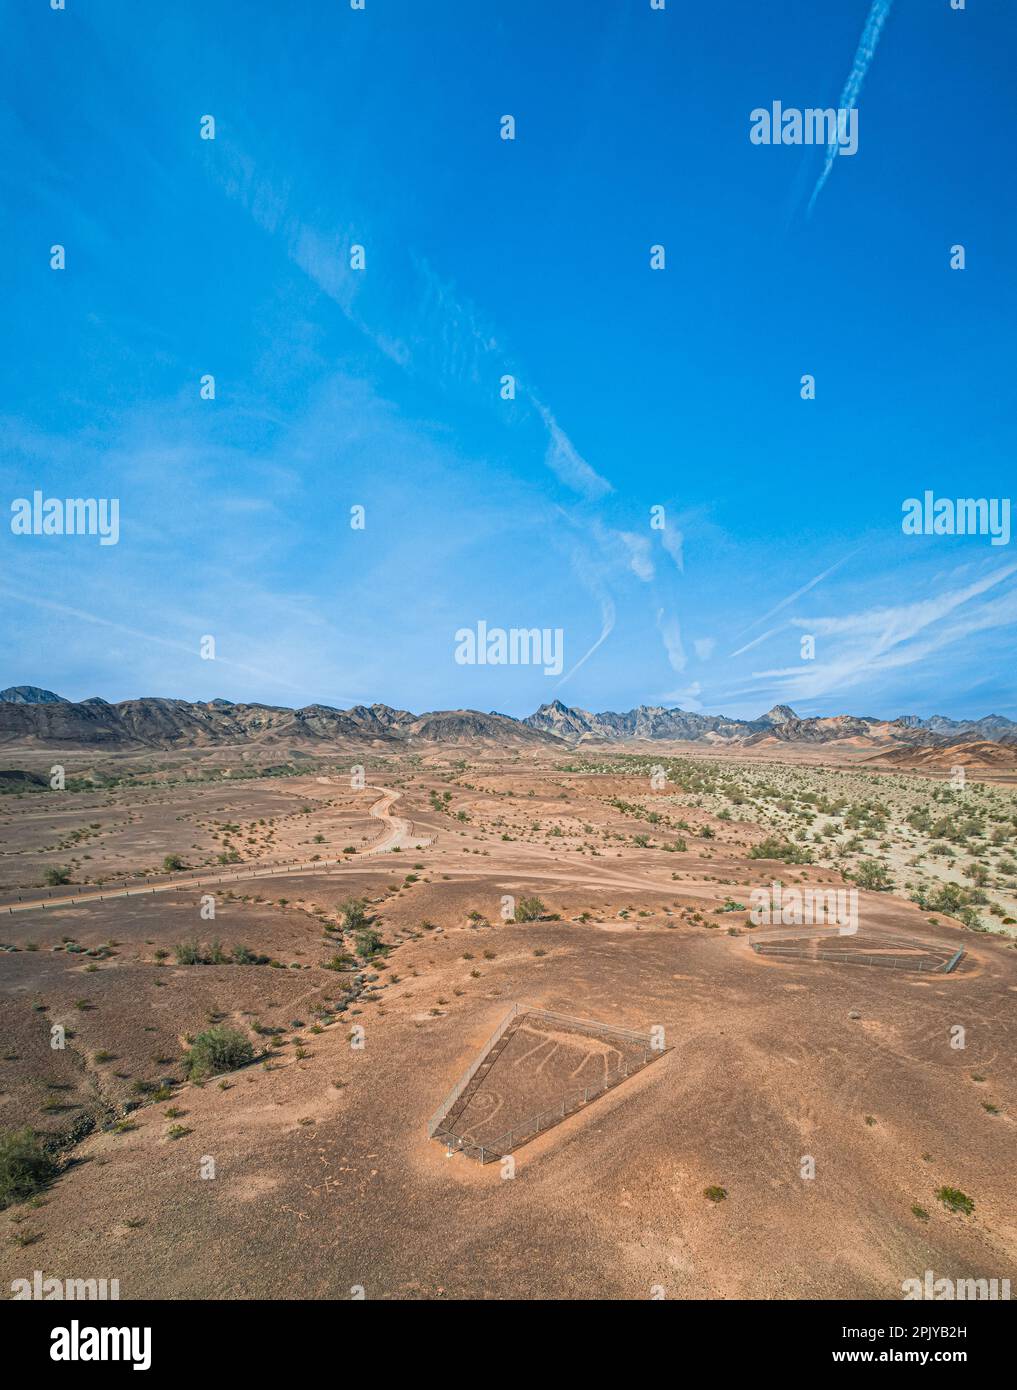 An aerial perspective of the mysterious Native American geoglyph land art at the Blythe Intaglios site in southeastern California. Stock Photo